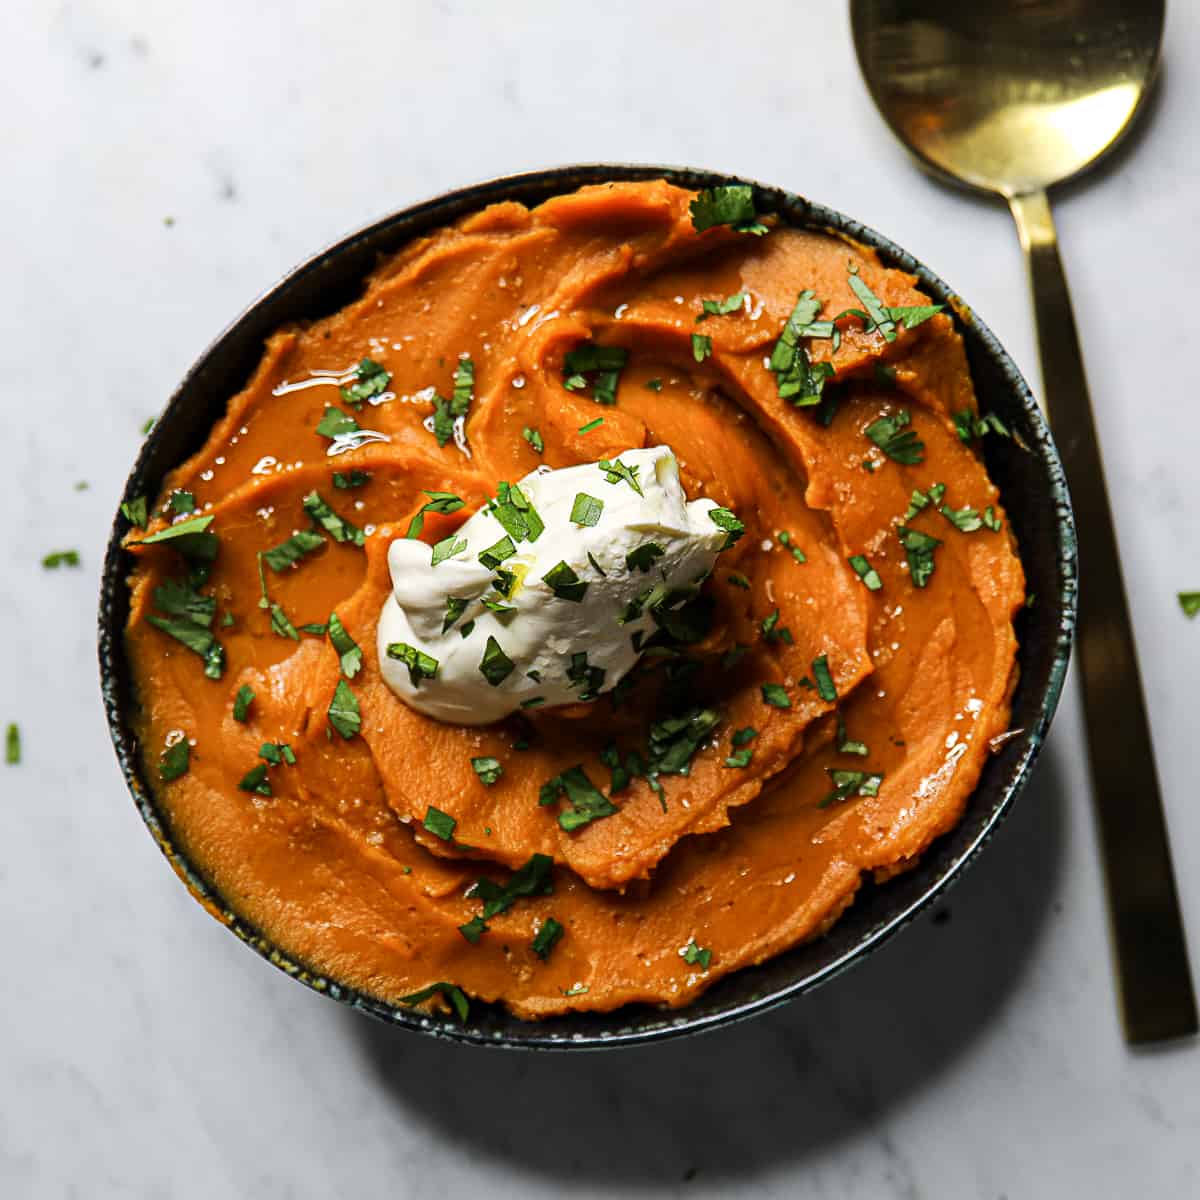 Crock Pot Sweet Potatoes Mashed for steak dishes